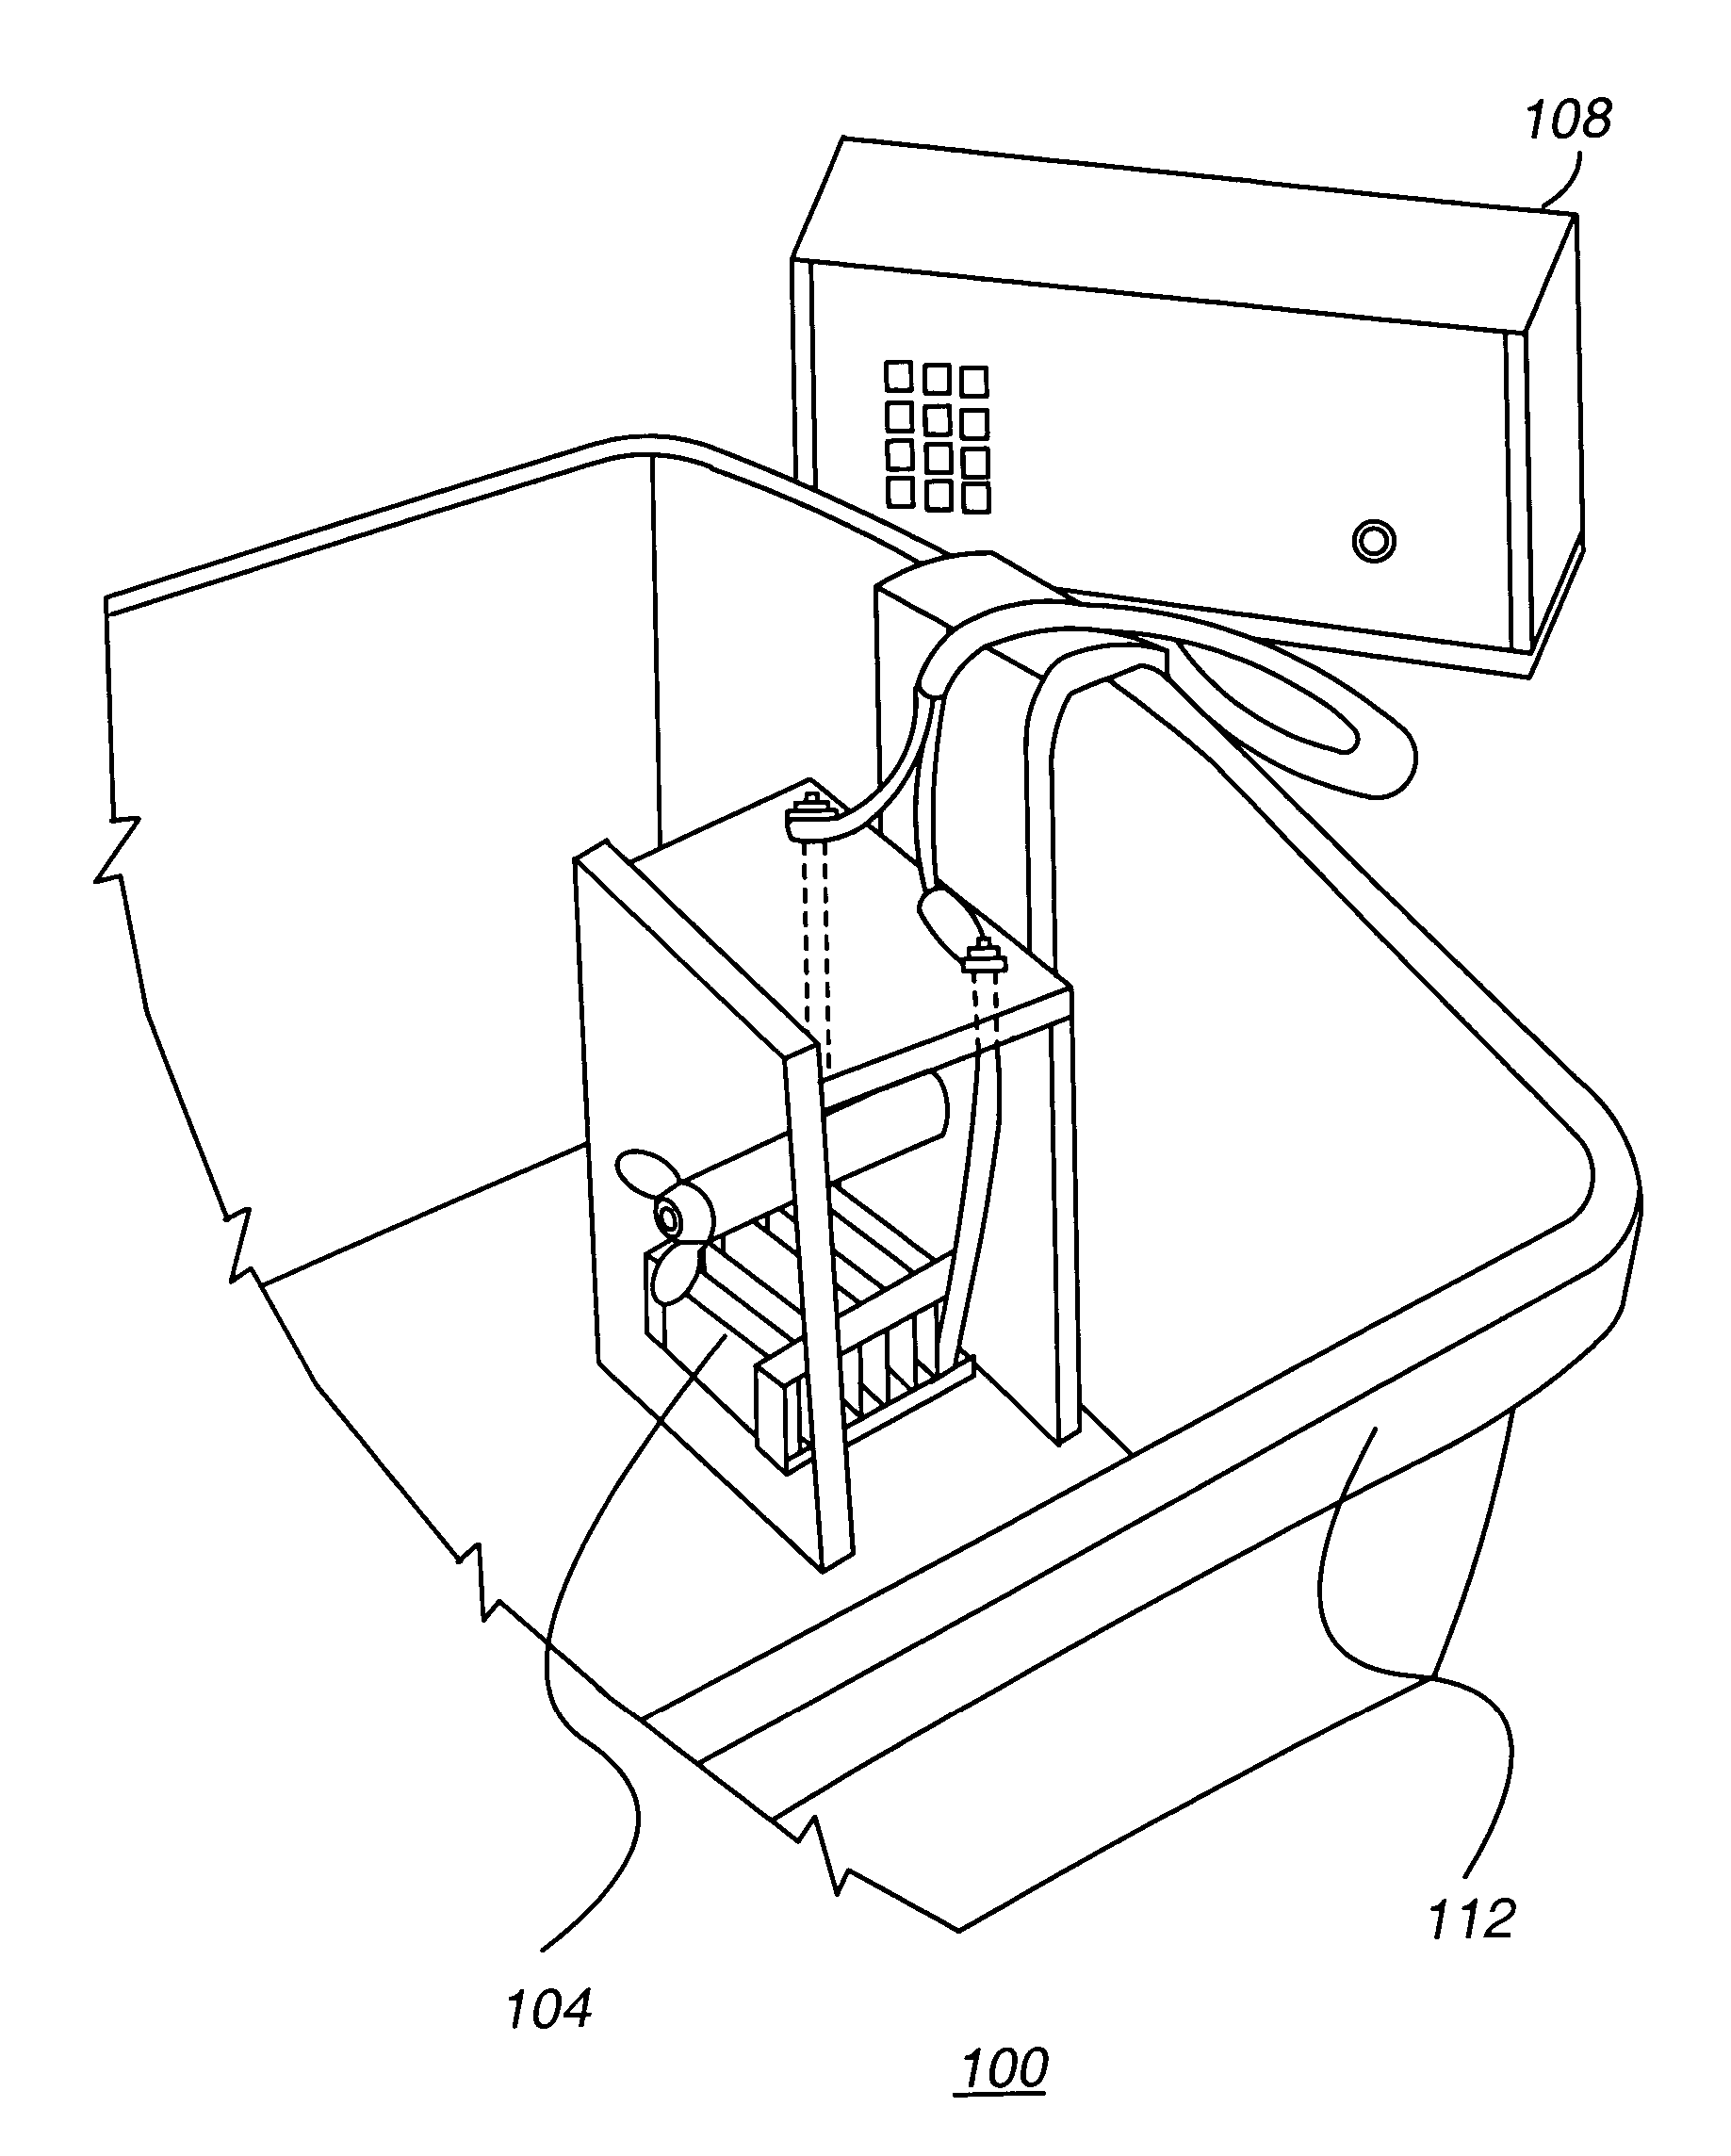 Therapeutic electrolysis device